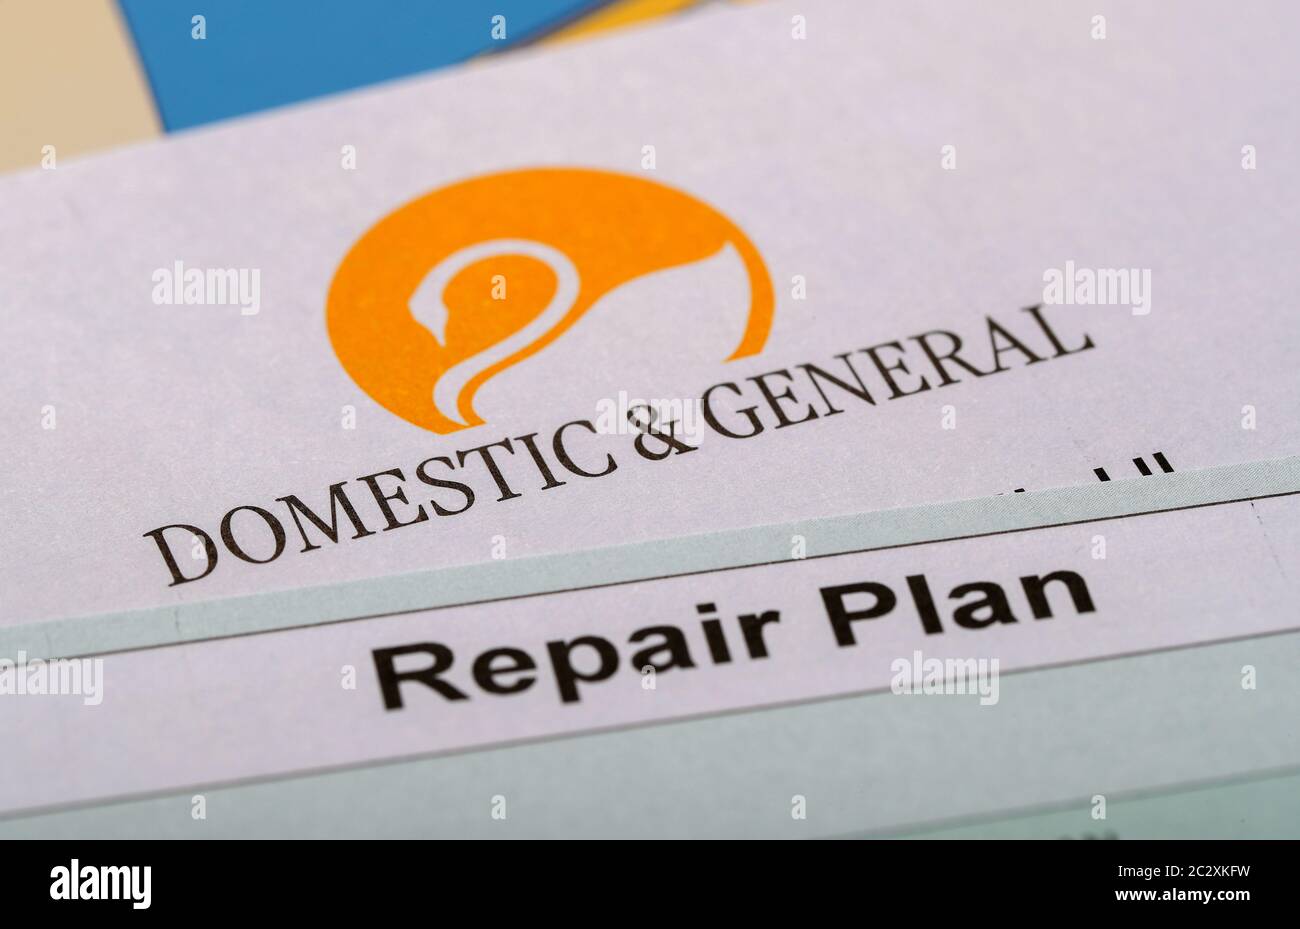 Domestic and General appliance protection insurance repair plan, to cover kitchen goods in the event of breakdown Stock Photo